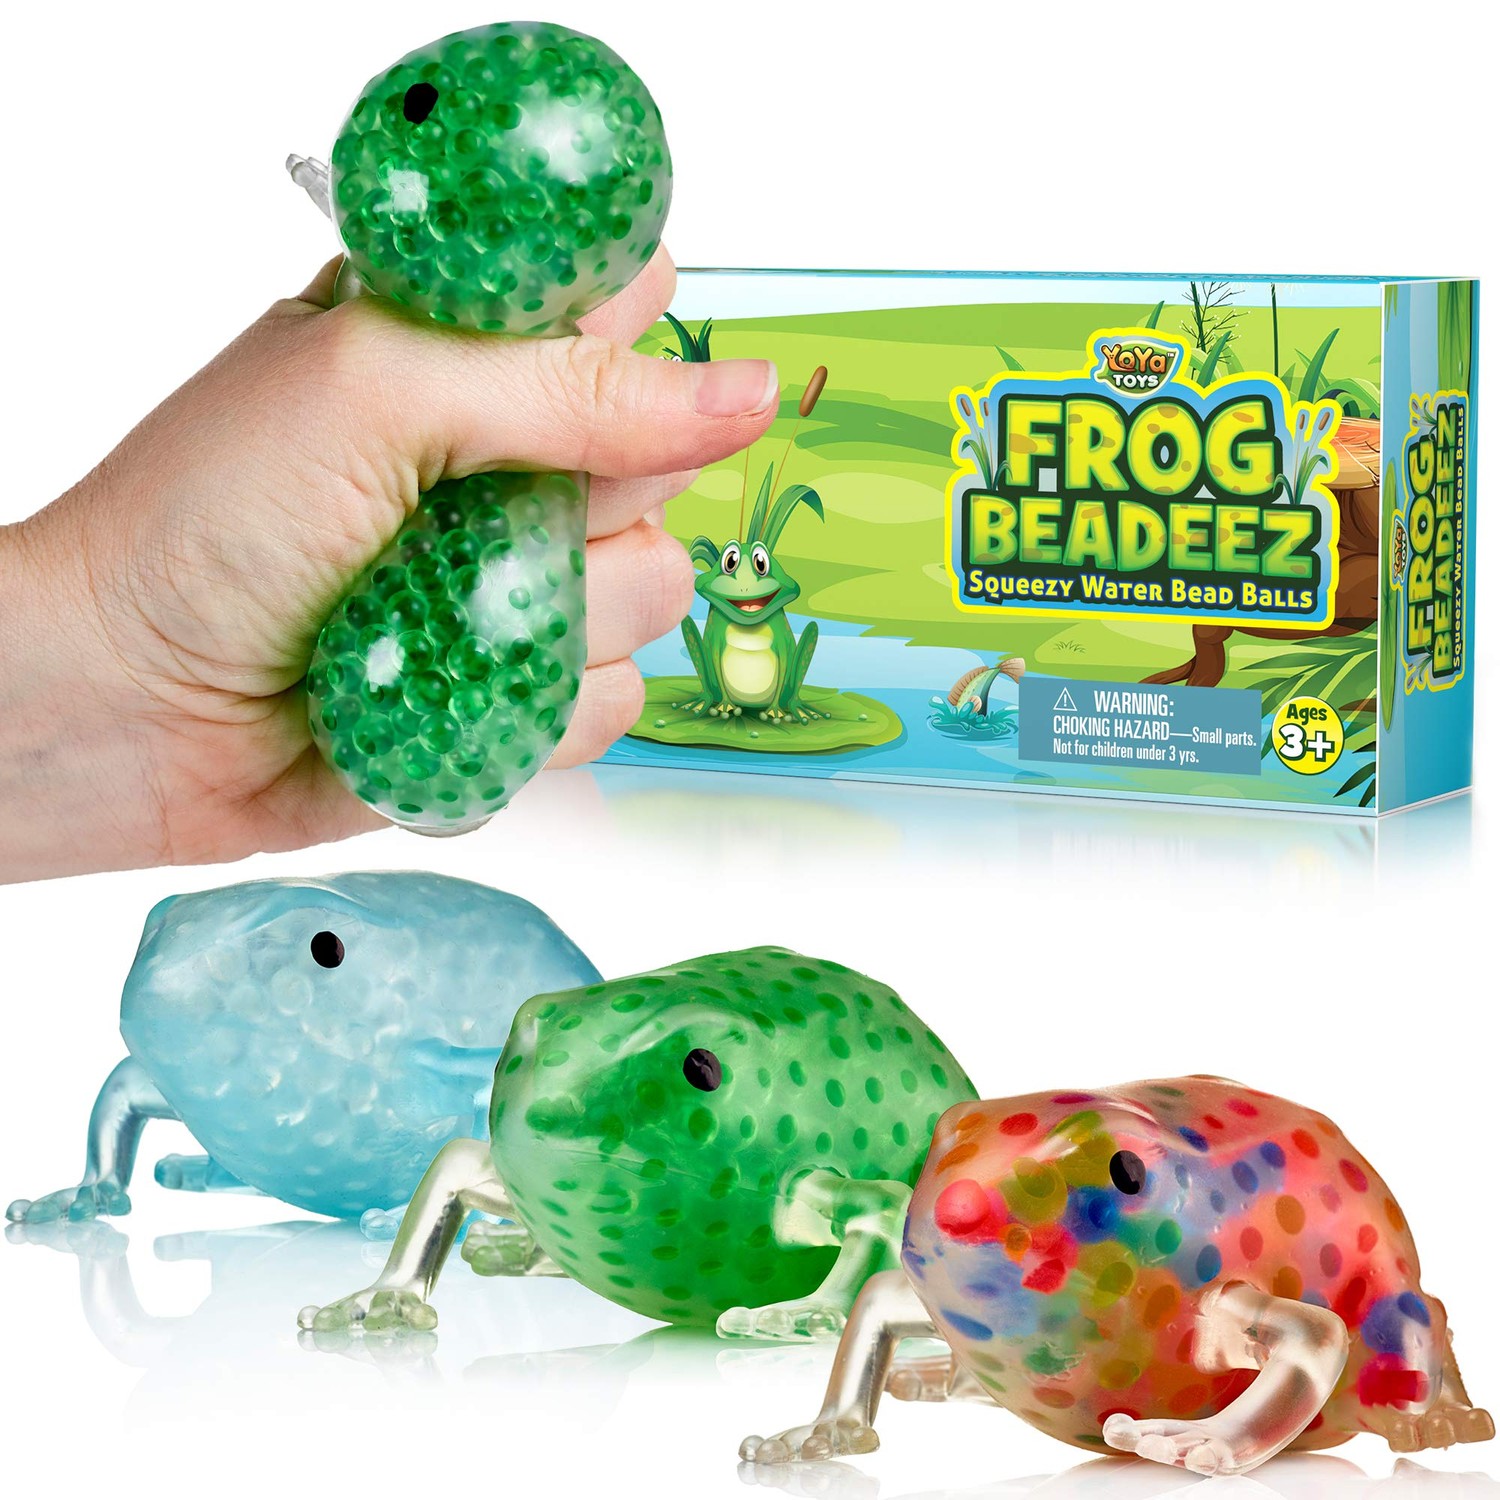 YoYa Toys Frog Beadeez Squishy Stress Balls (3 Pack) - Colorful Water ...